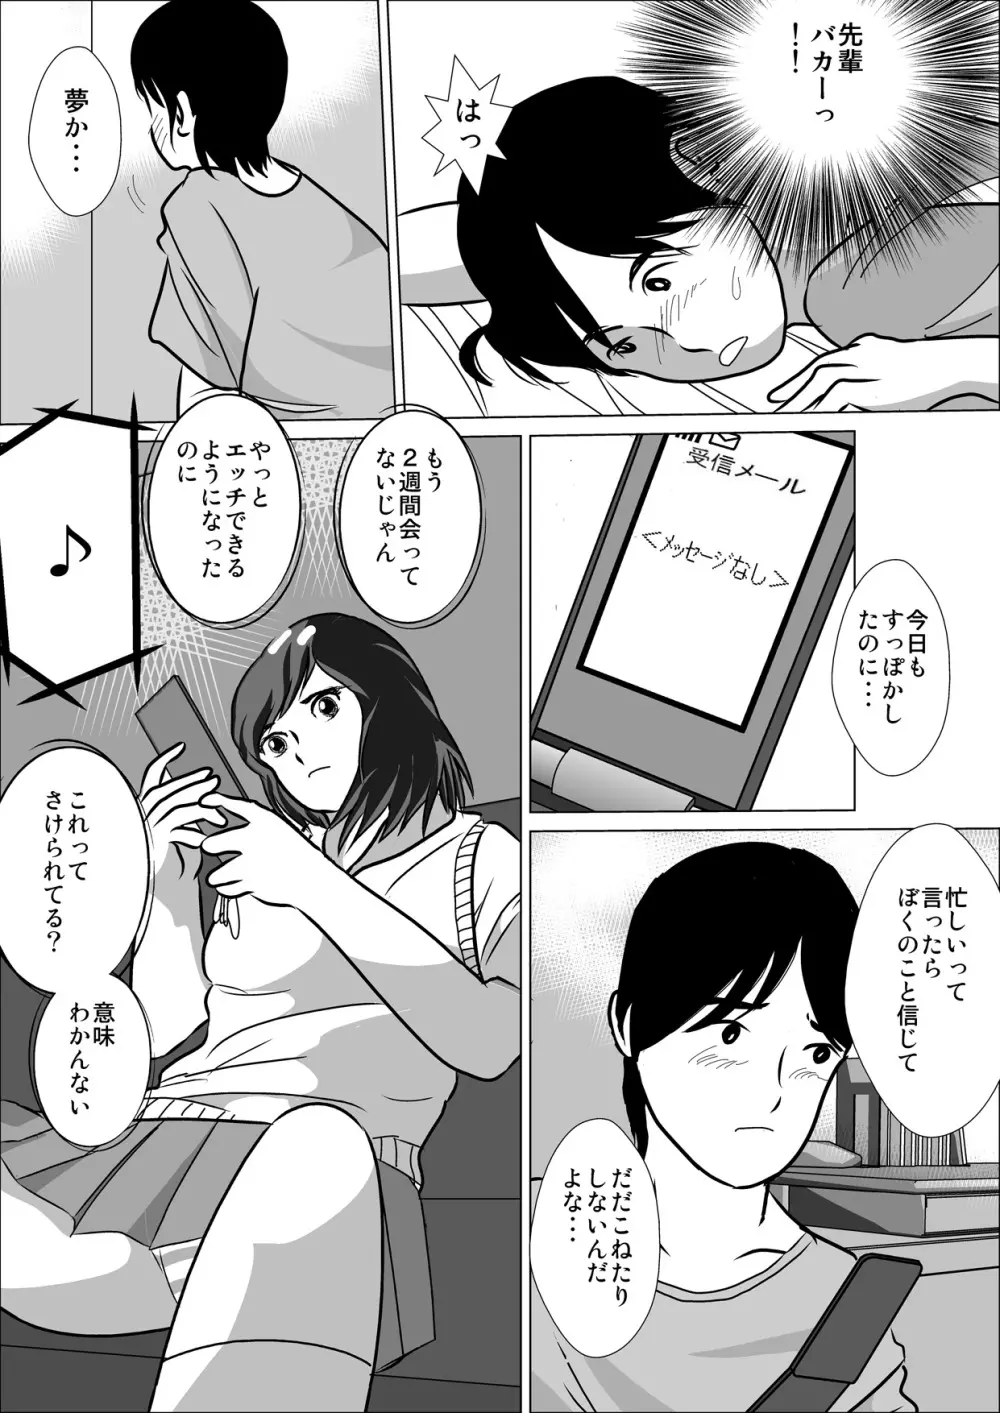 LOVE IS THE PLAN Chapter 5 19ページ